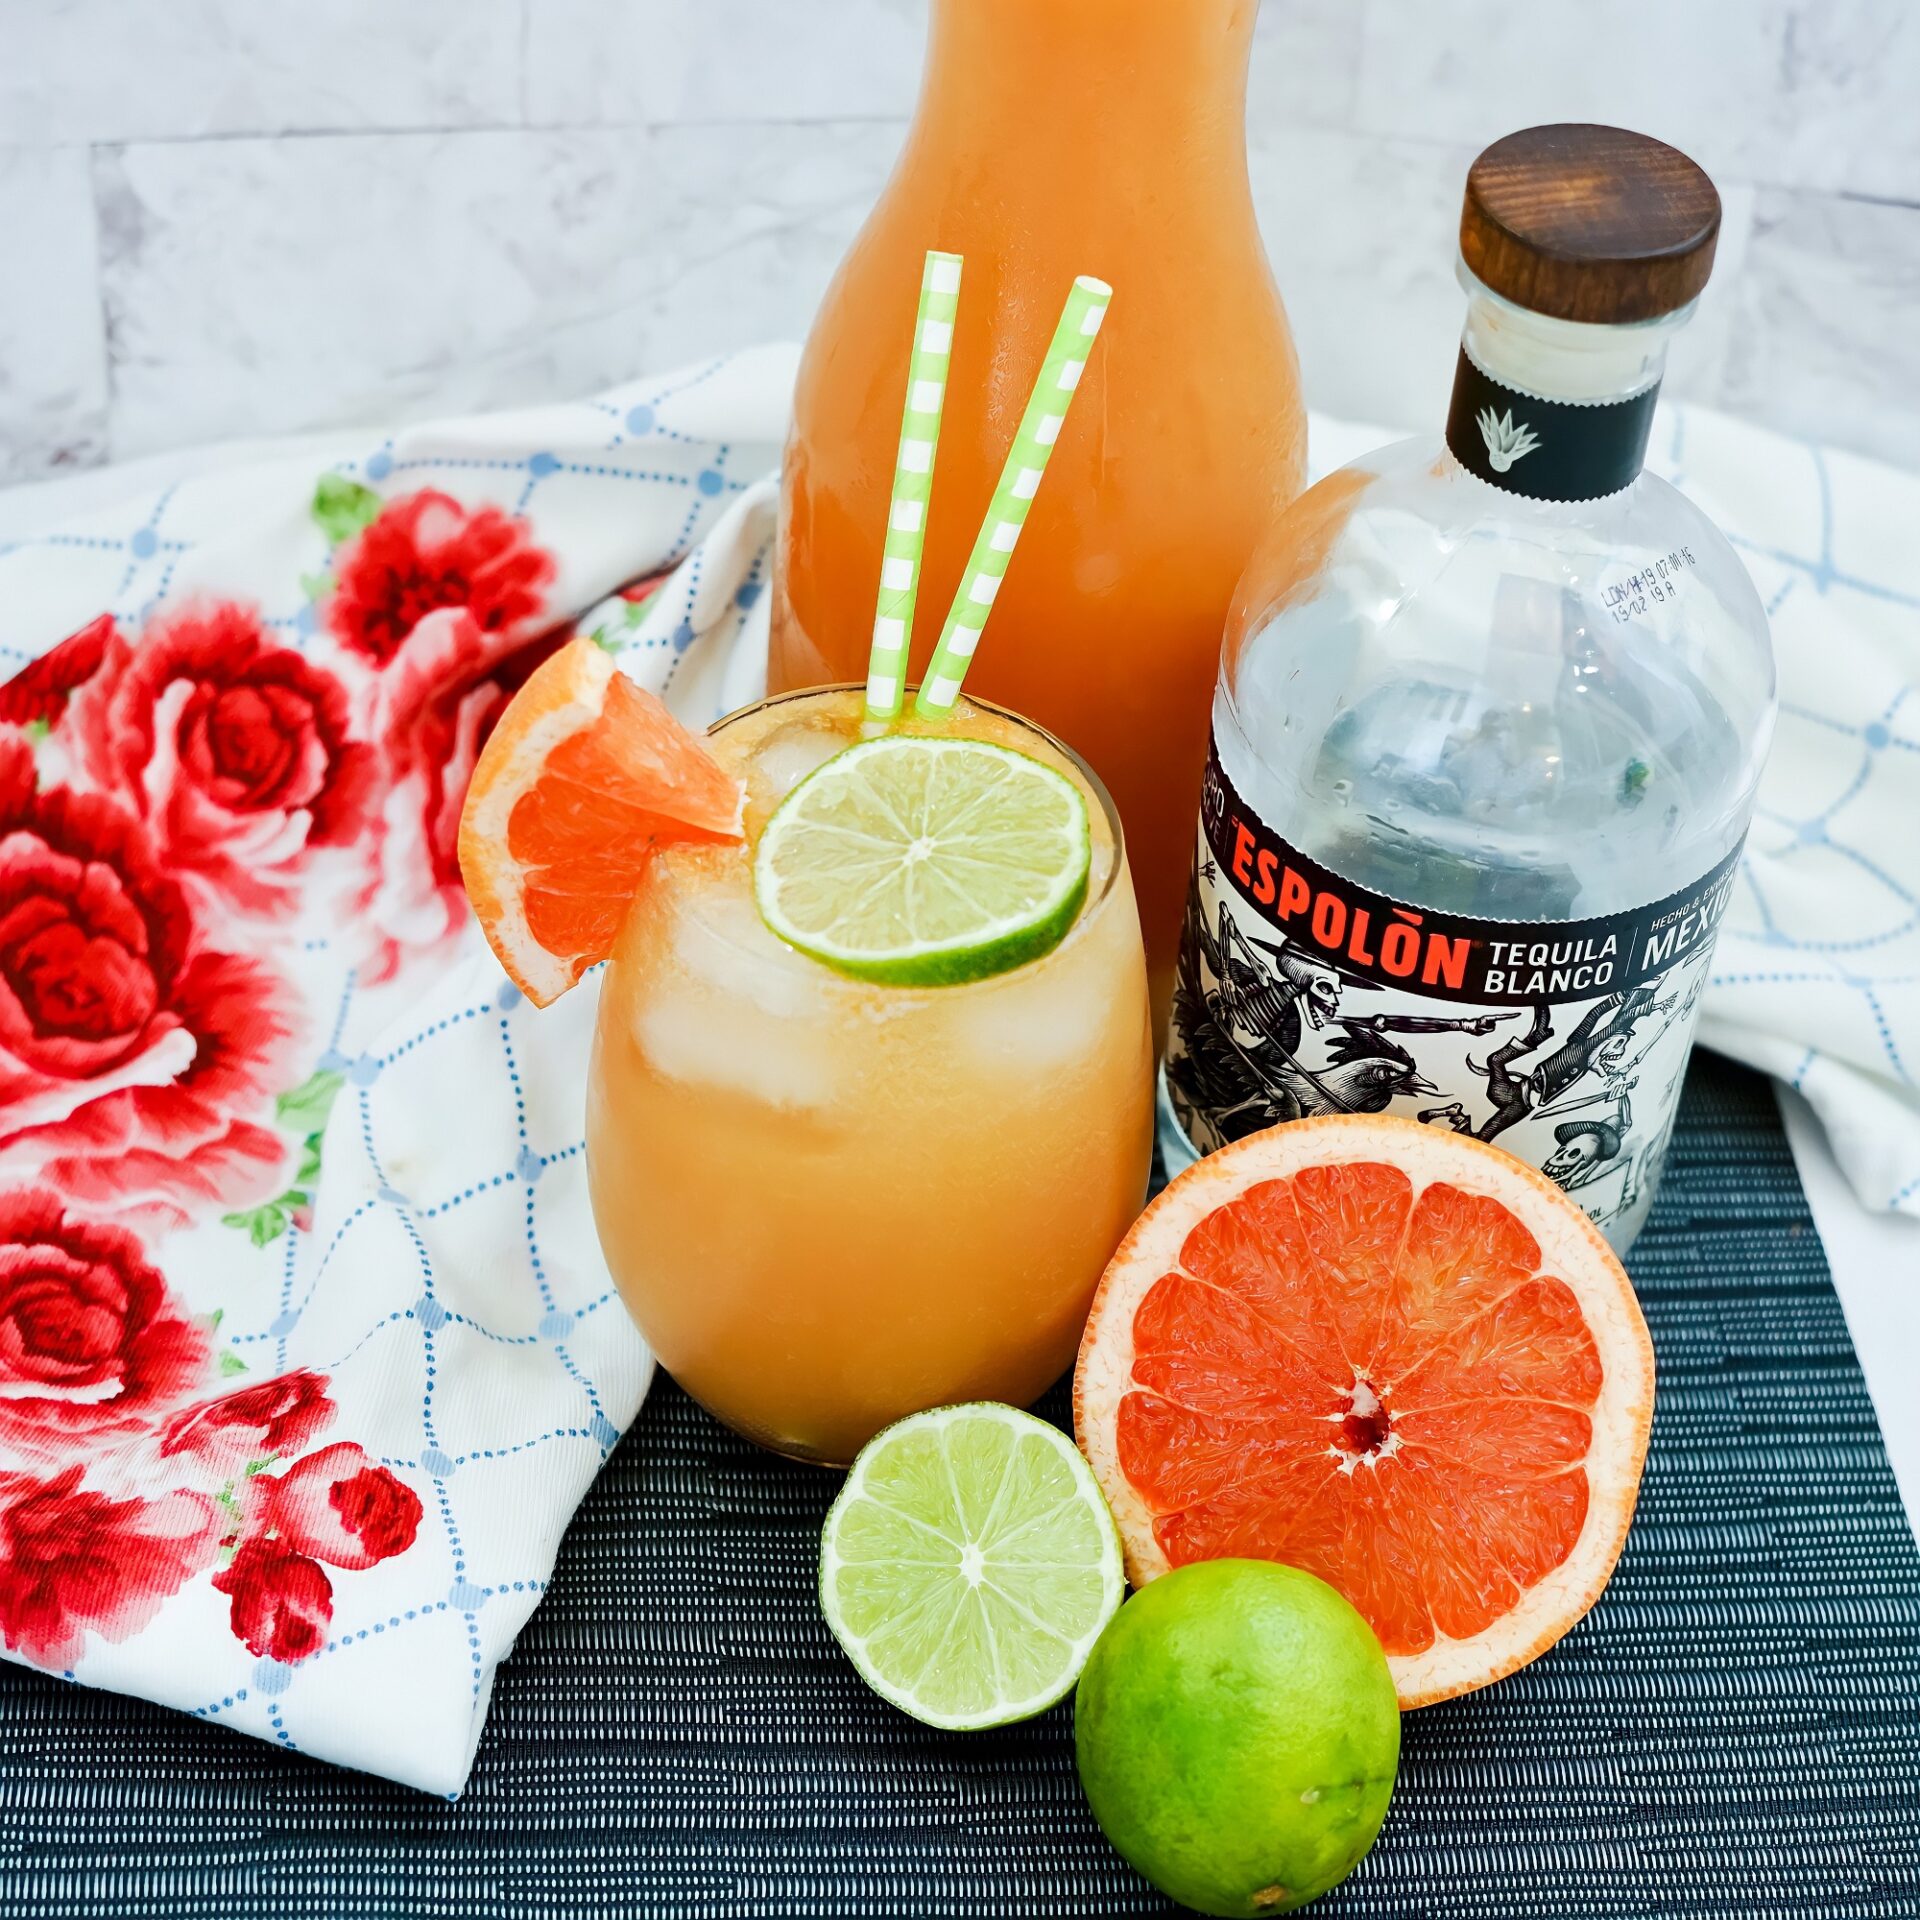 Paloma cocktail in a glass with lime slice and grapefruit wedge garnish.